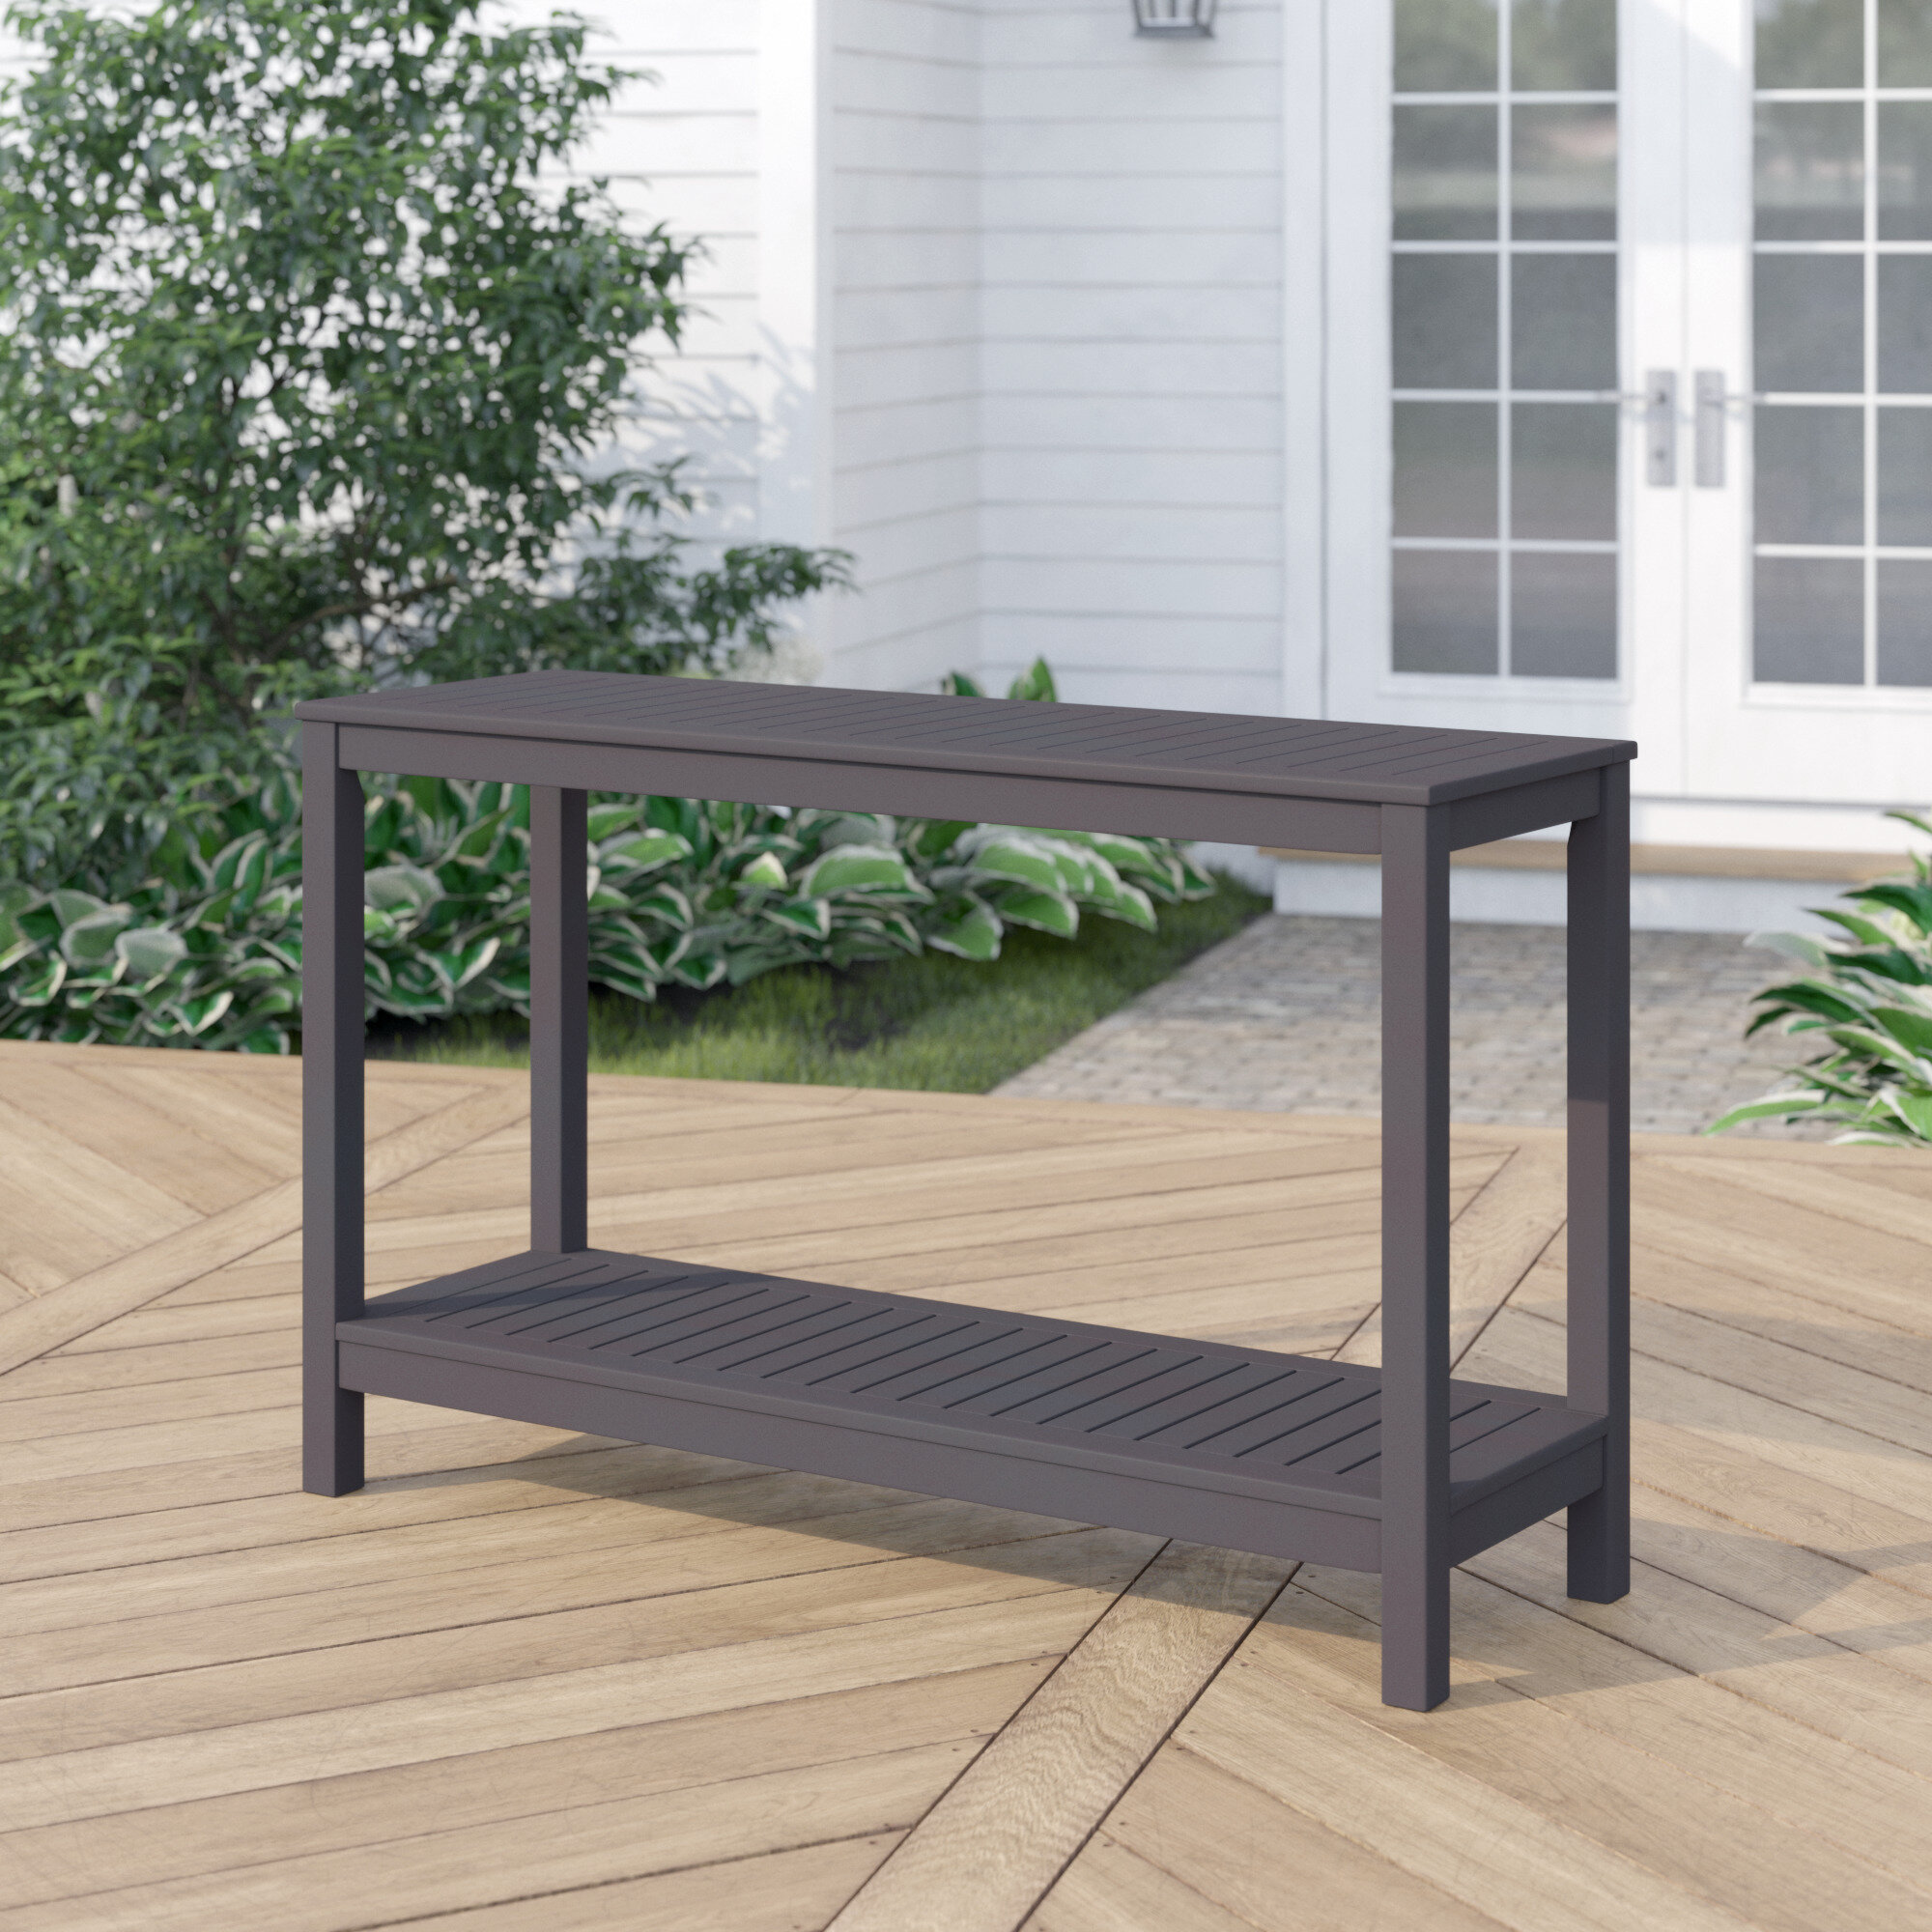 Outdoor Console Tables Up To 50 Off Through 07 05 Wayfair